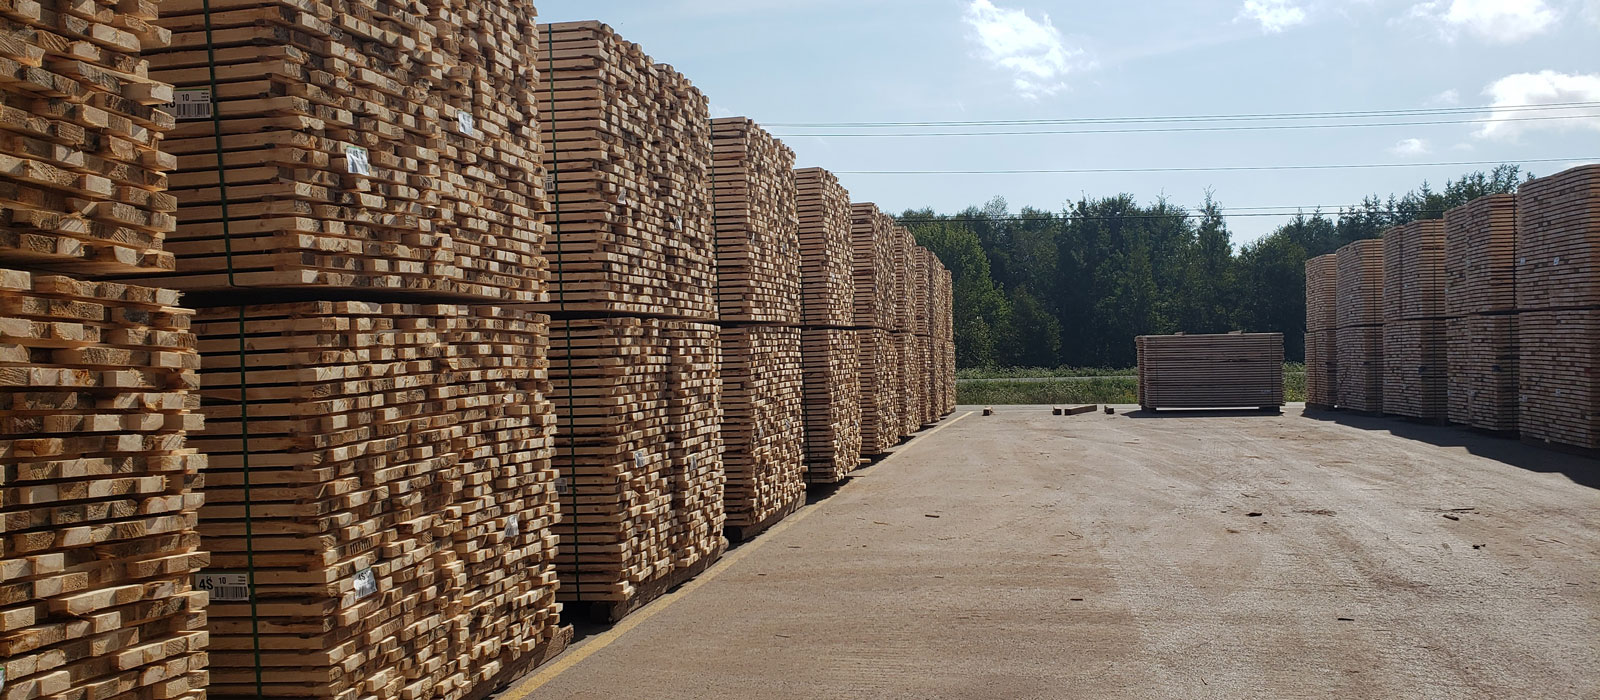 Stacked lumber in a yard